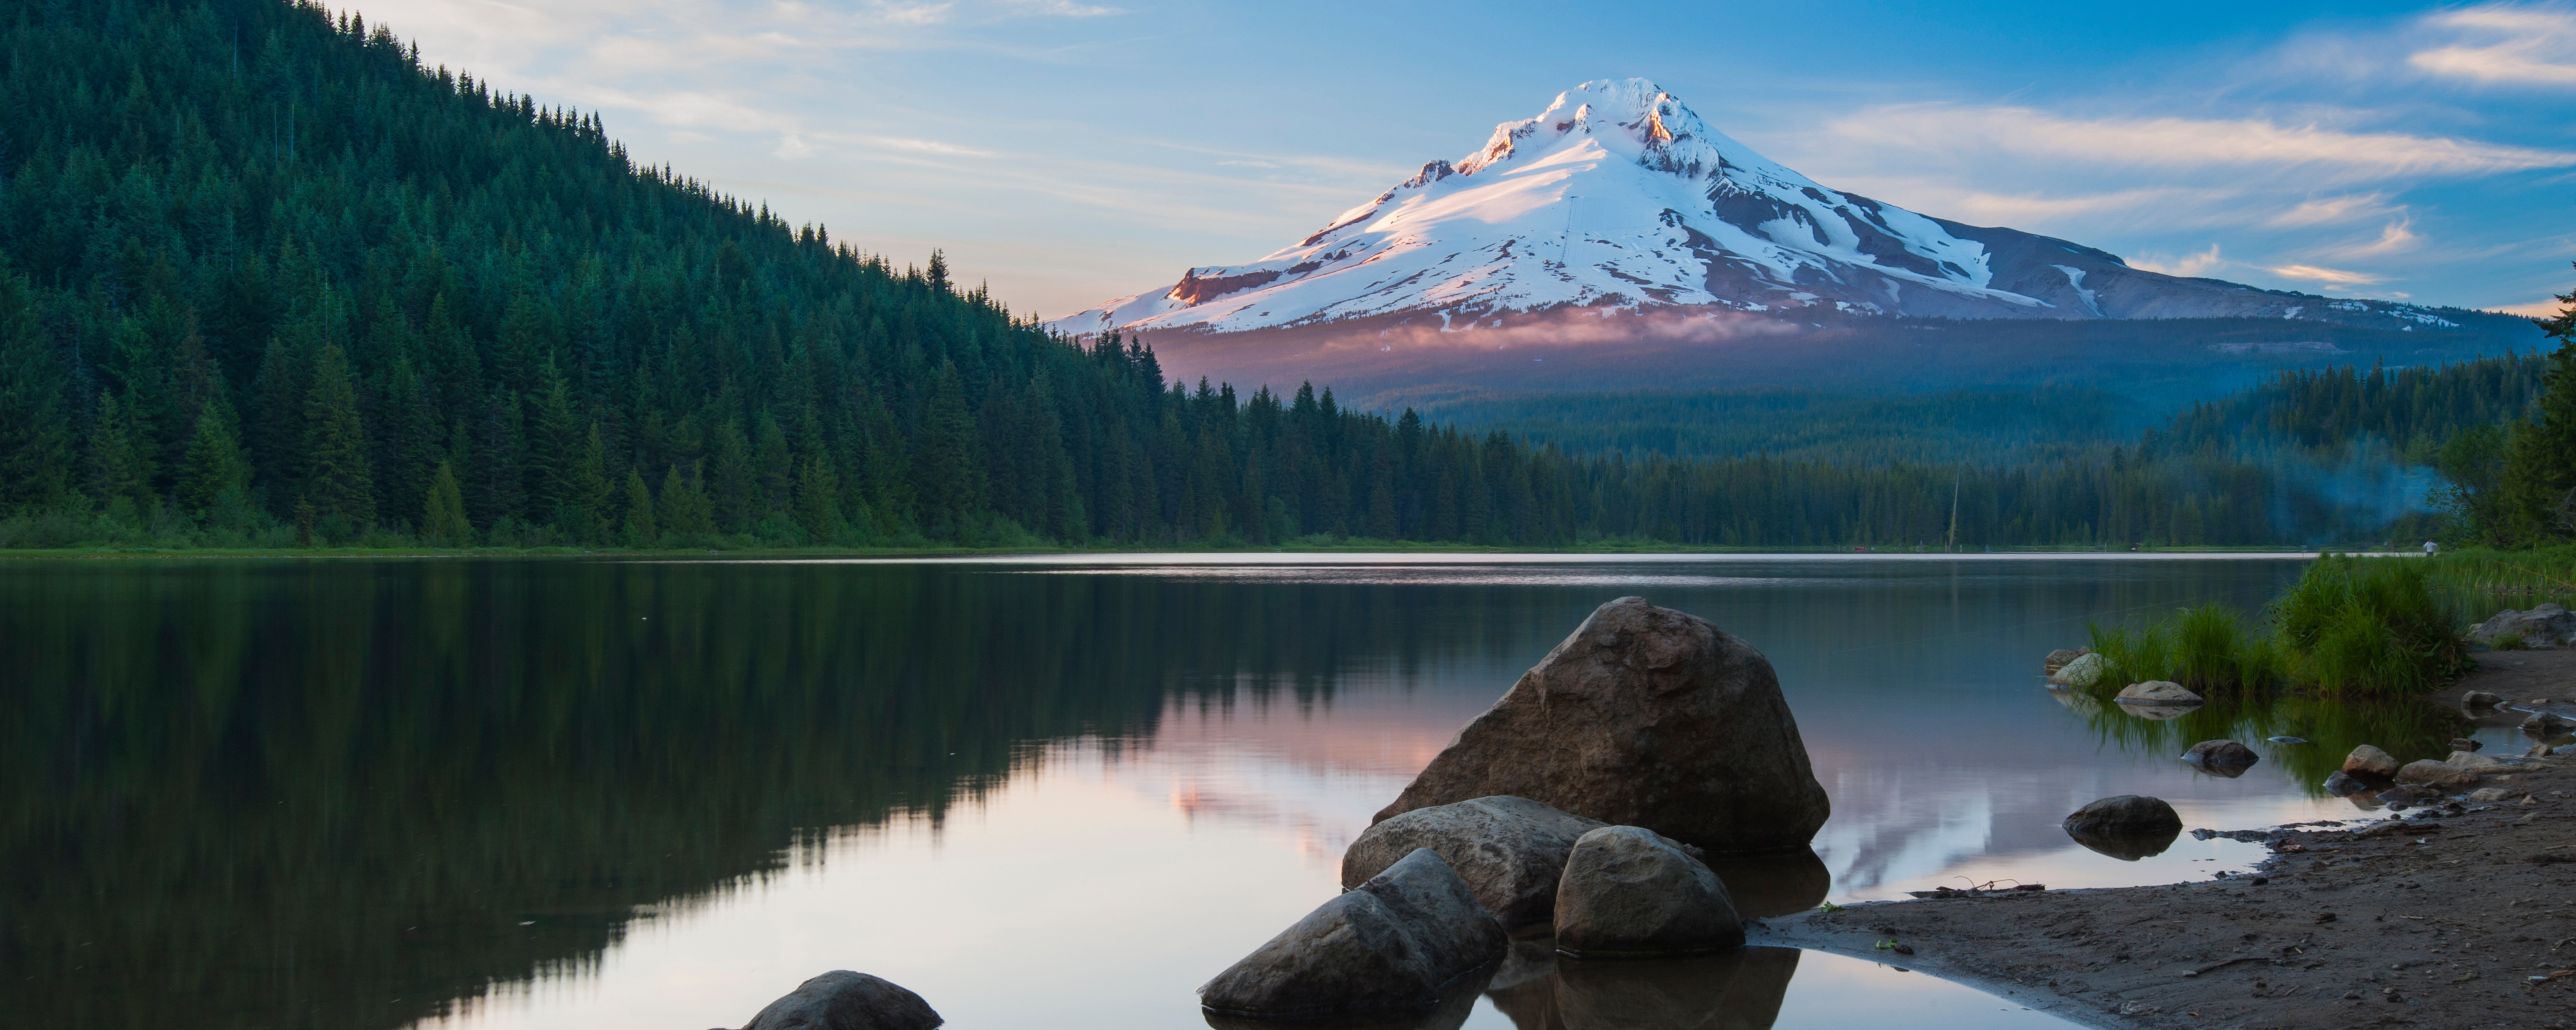 Image of Mount Hood on our chiropractic online CE page